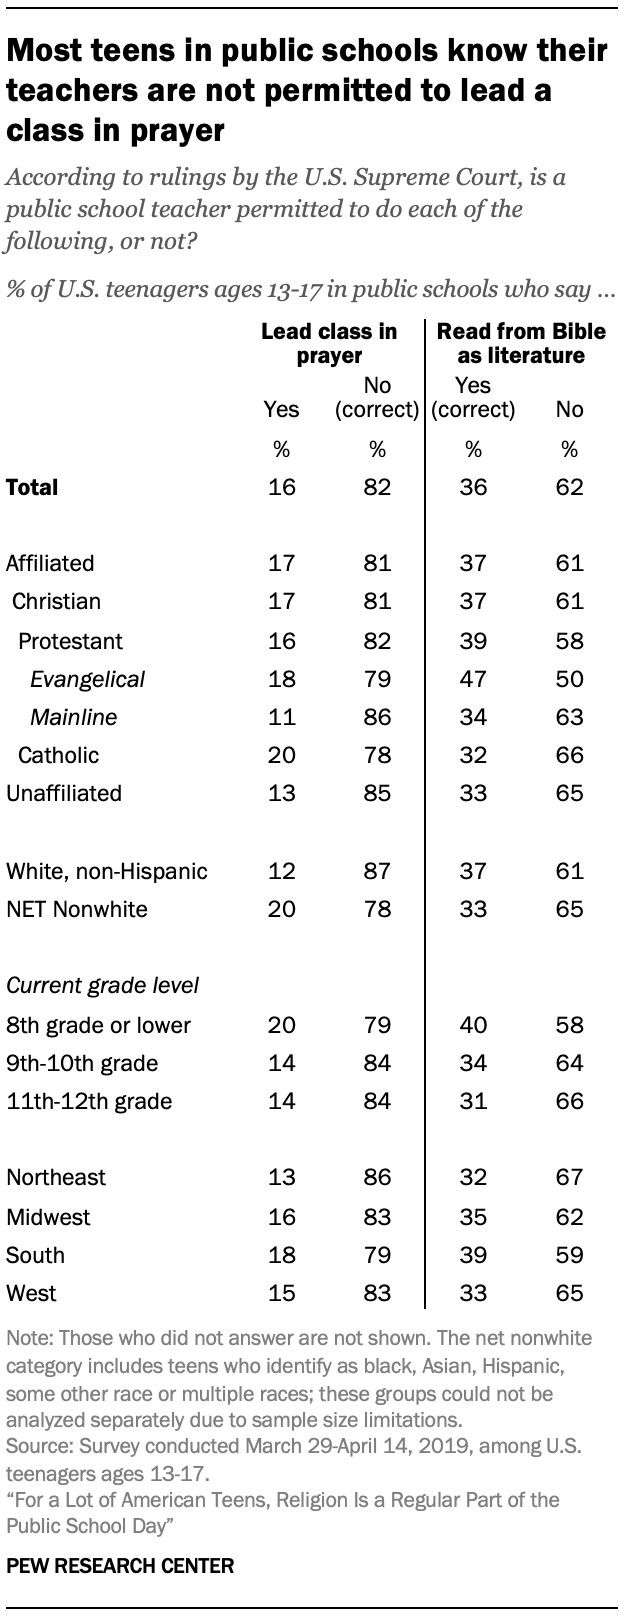 Most teens in public schools know their teachers are not permitted to lead a class in prayer